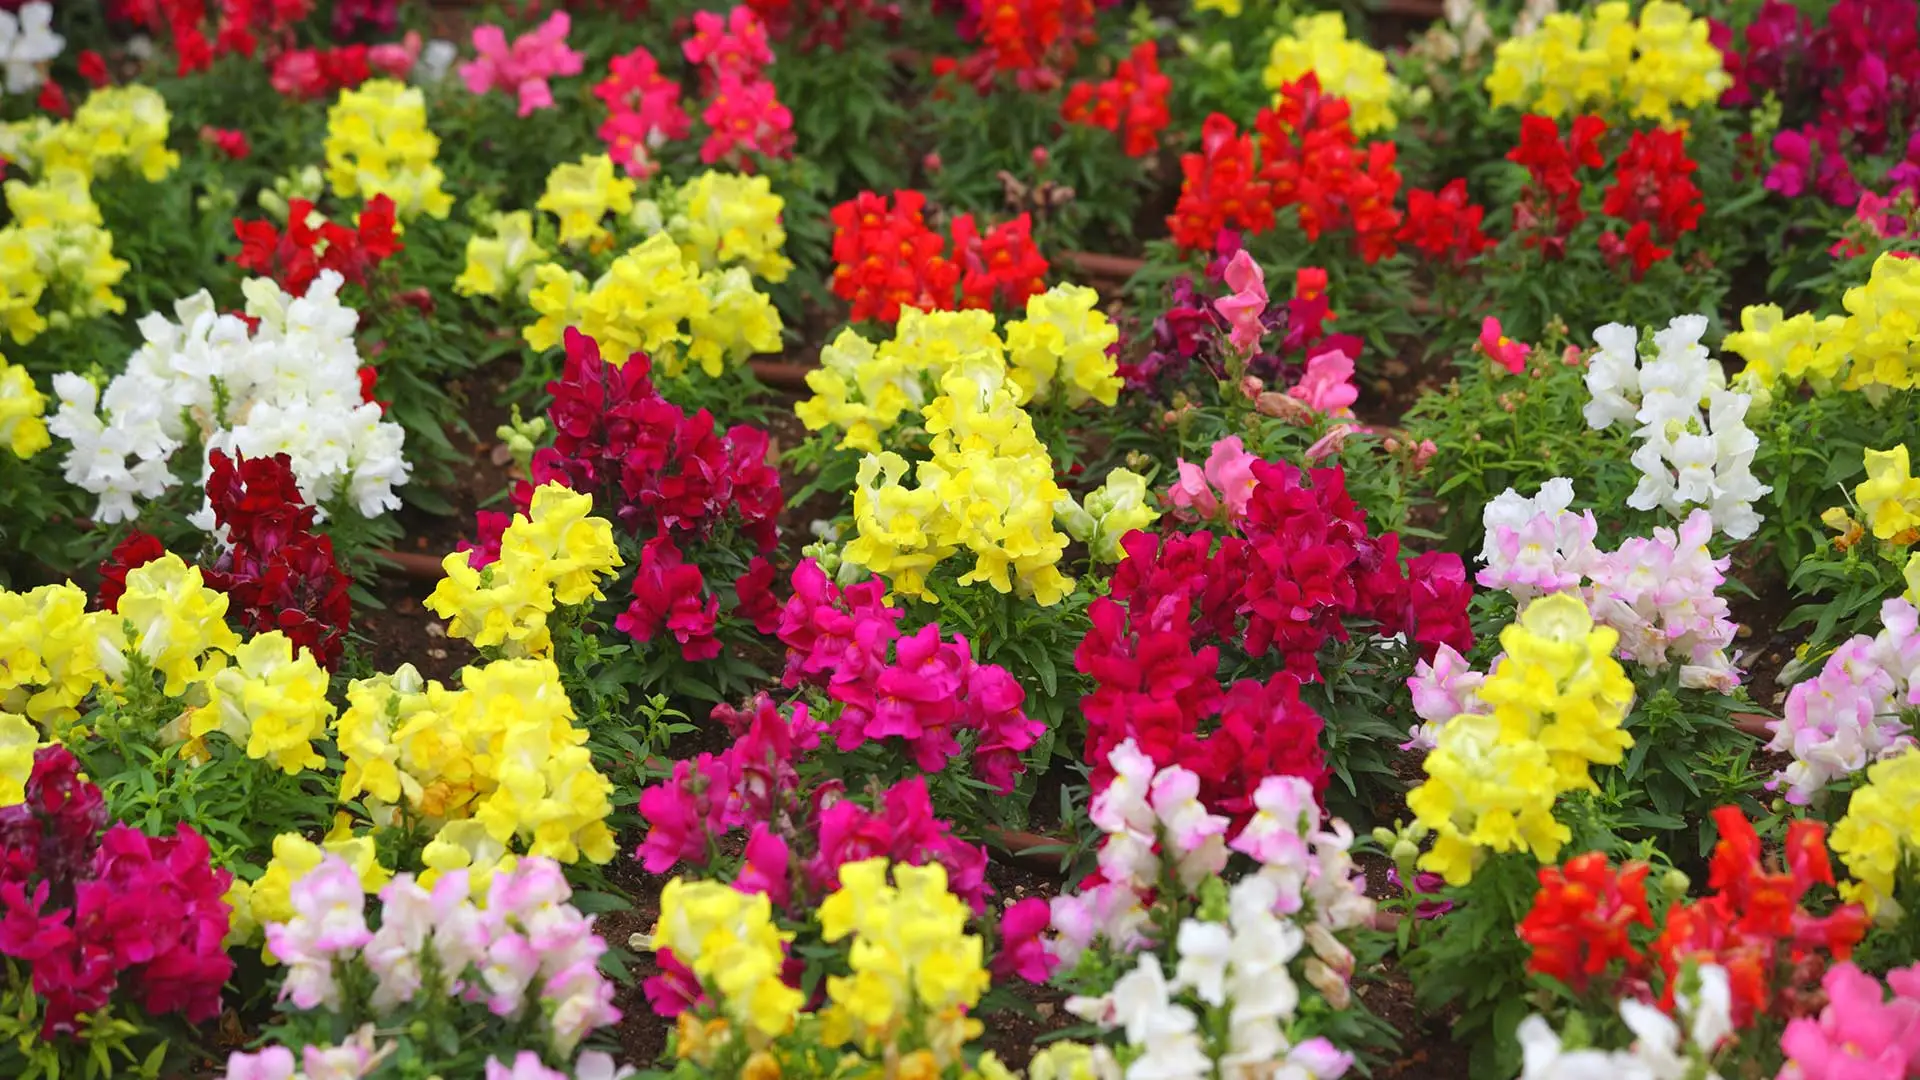 Brightly colored snapdragon flowers in bloom near Shelby, MI.